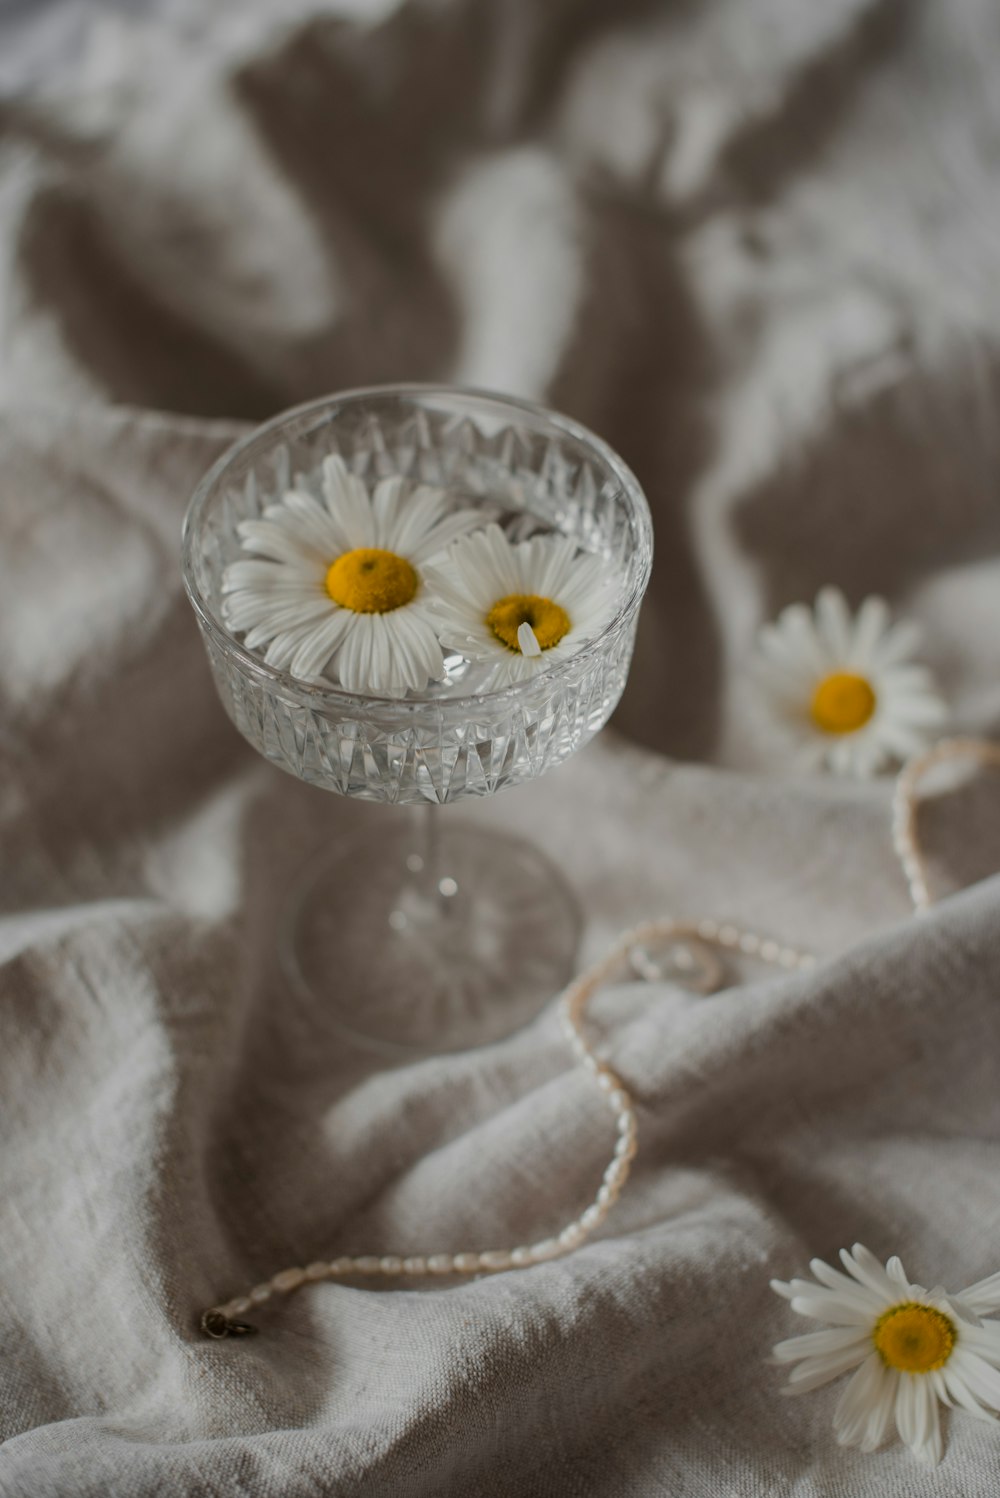 a small glass bowl with daisies in it